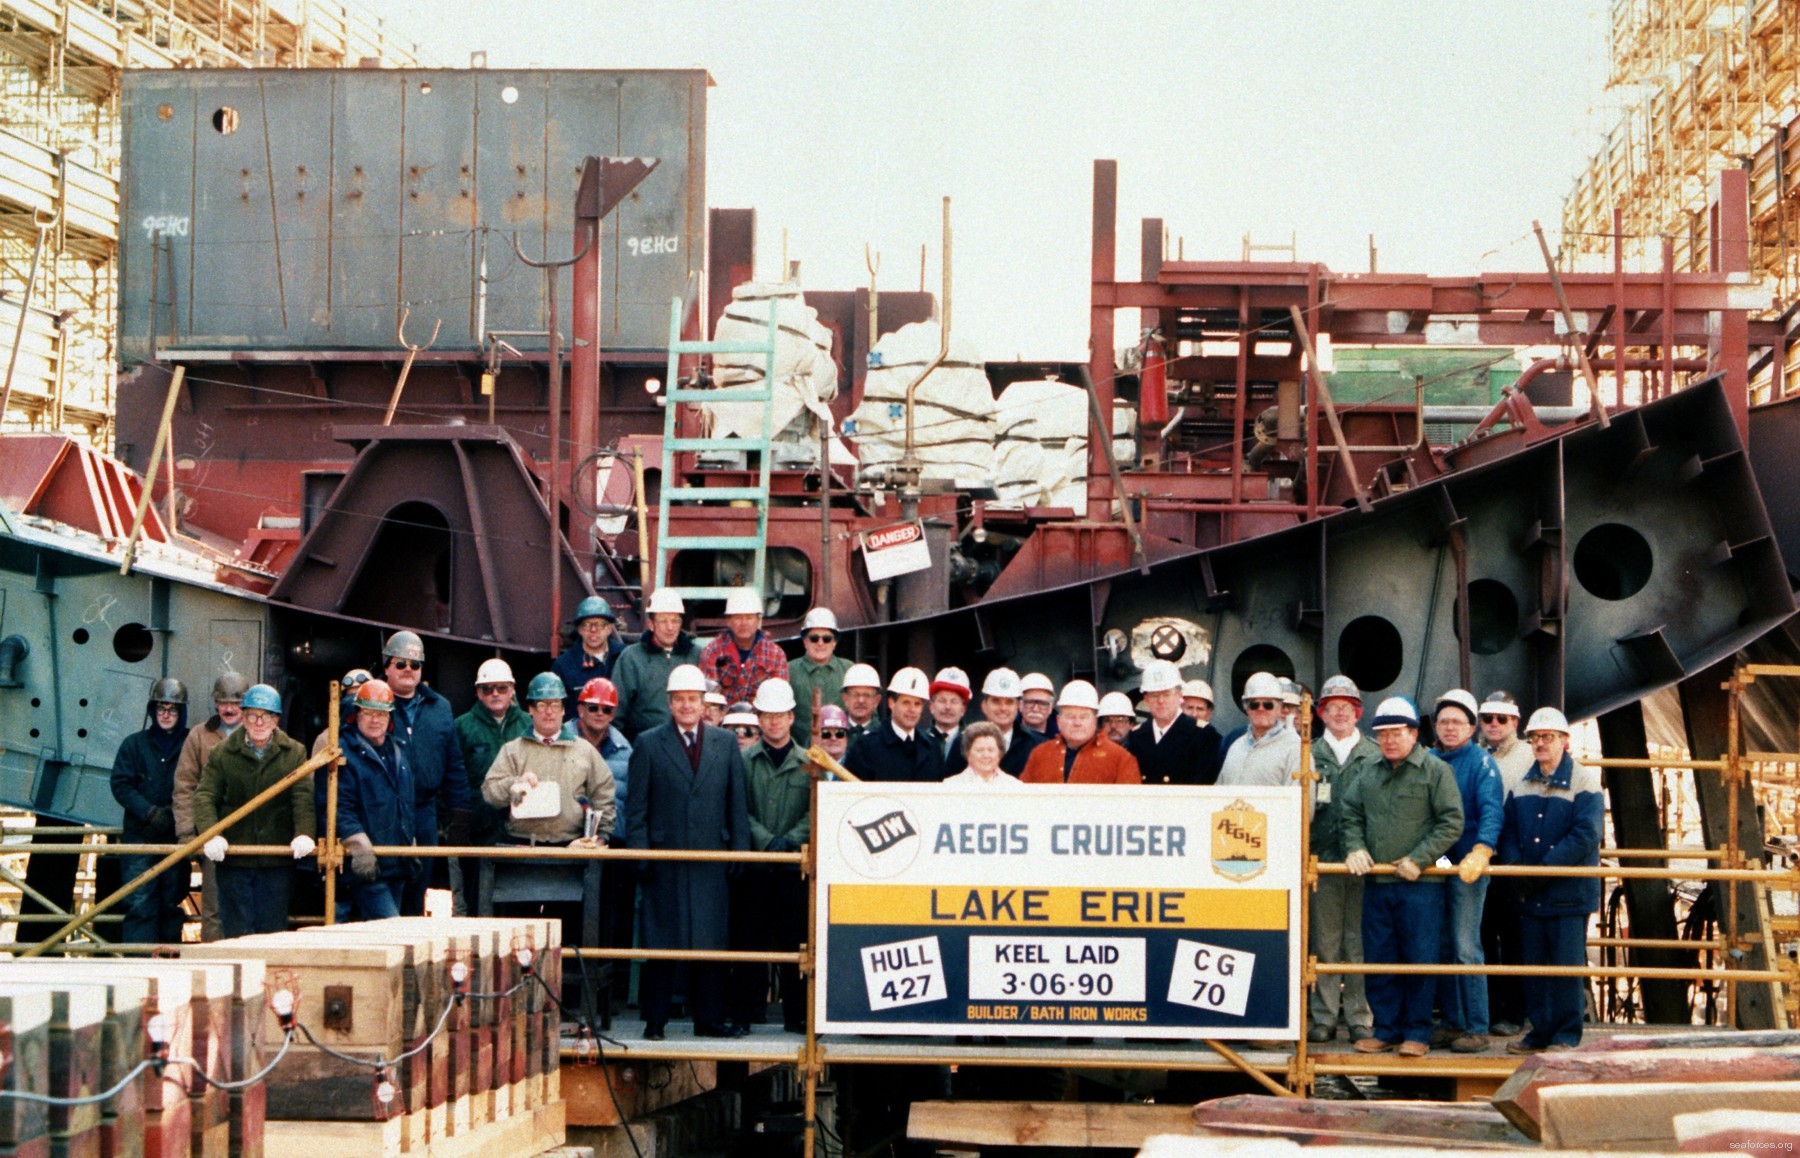 cg-70 uss lake erie ticonderoga class guided missile cruiser navy 110 keel laying ceremony bath iron works maine 1990